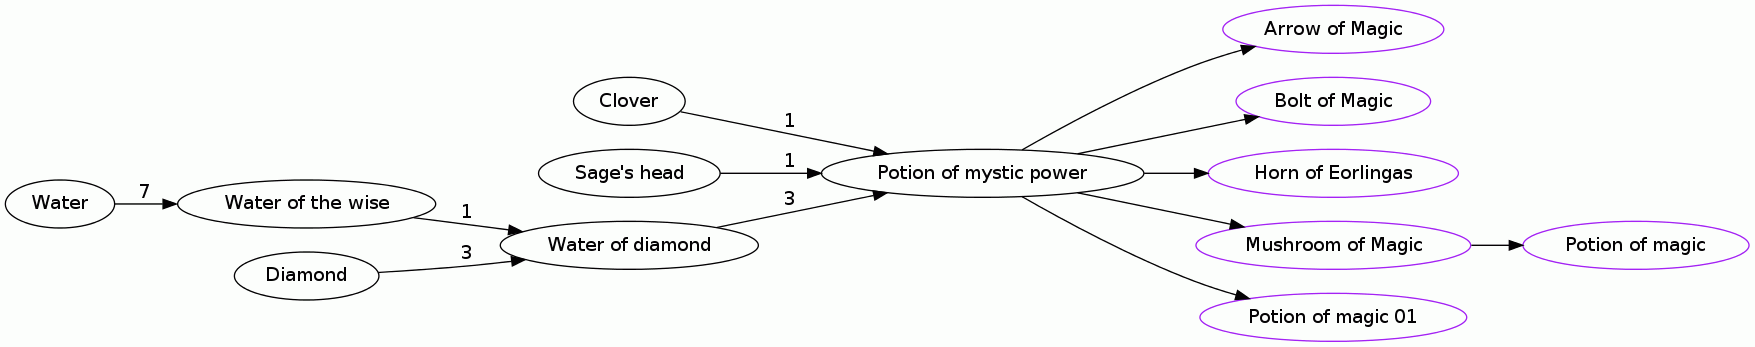 Potion of mystic power